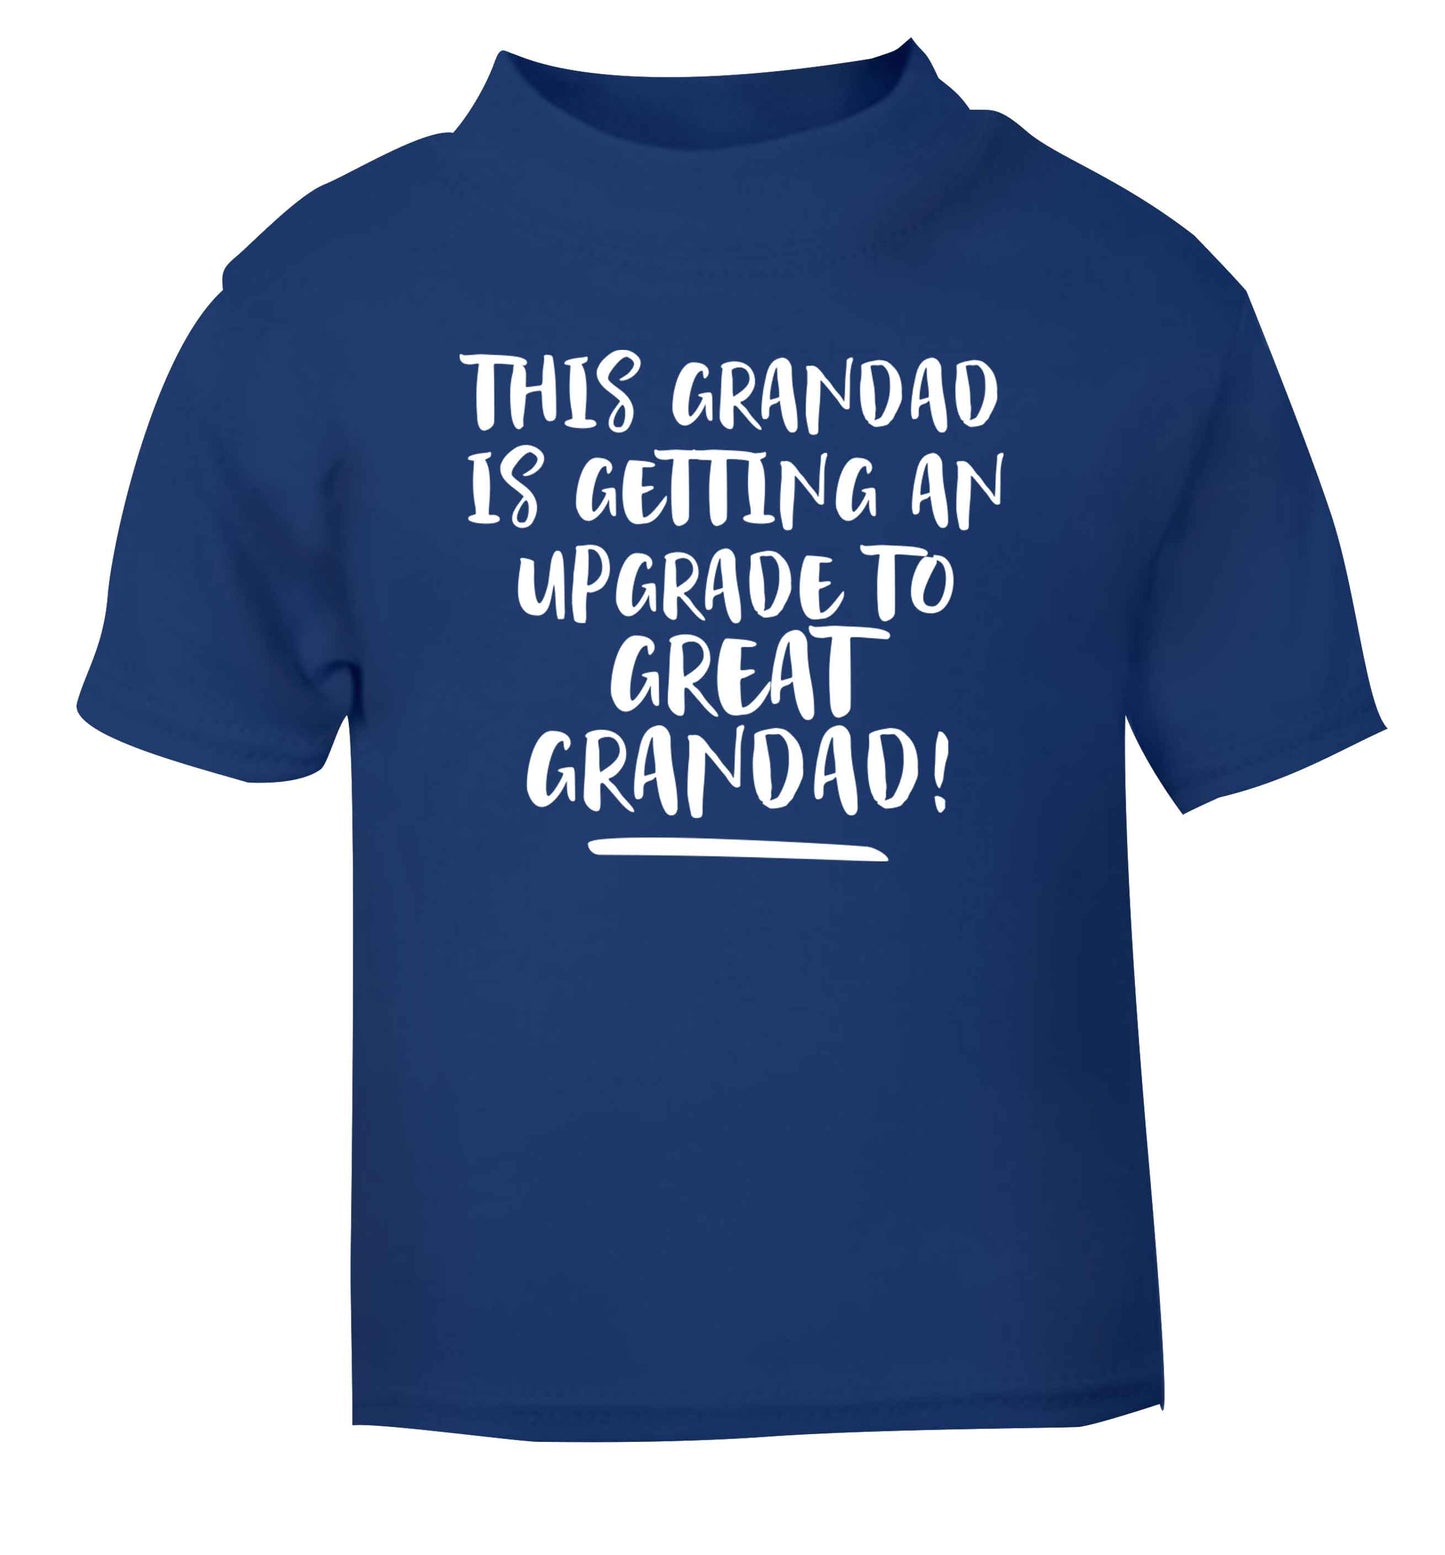 This grandad is getting an upgrade to great grandad! blue Baby Toddler Tshirt 2 Years